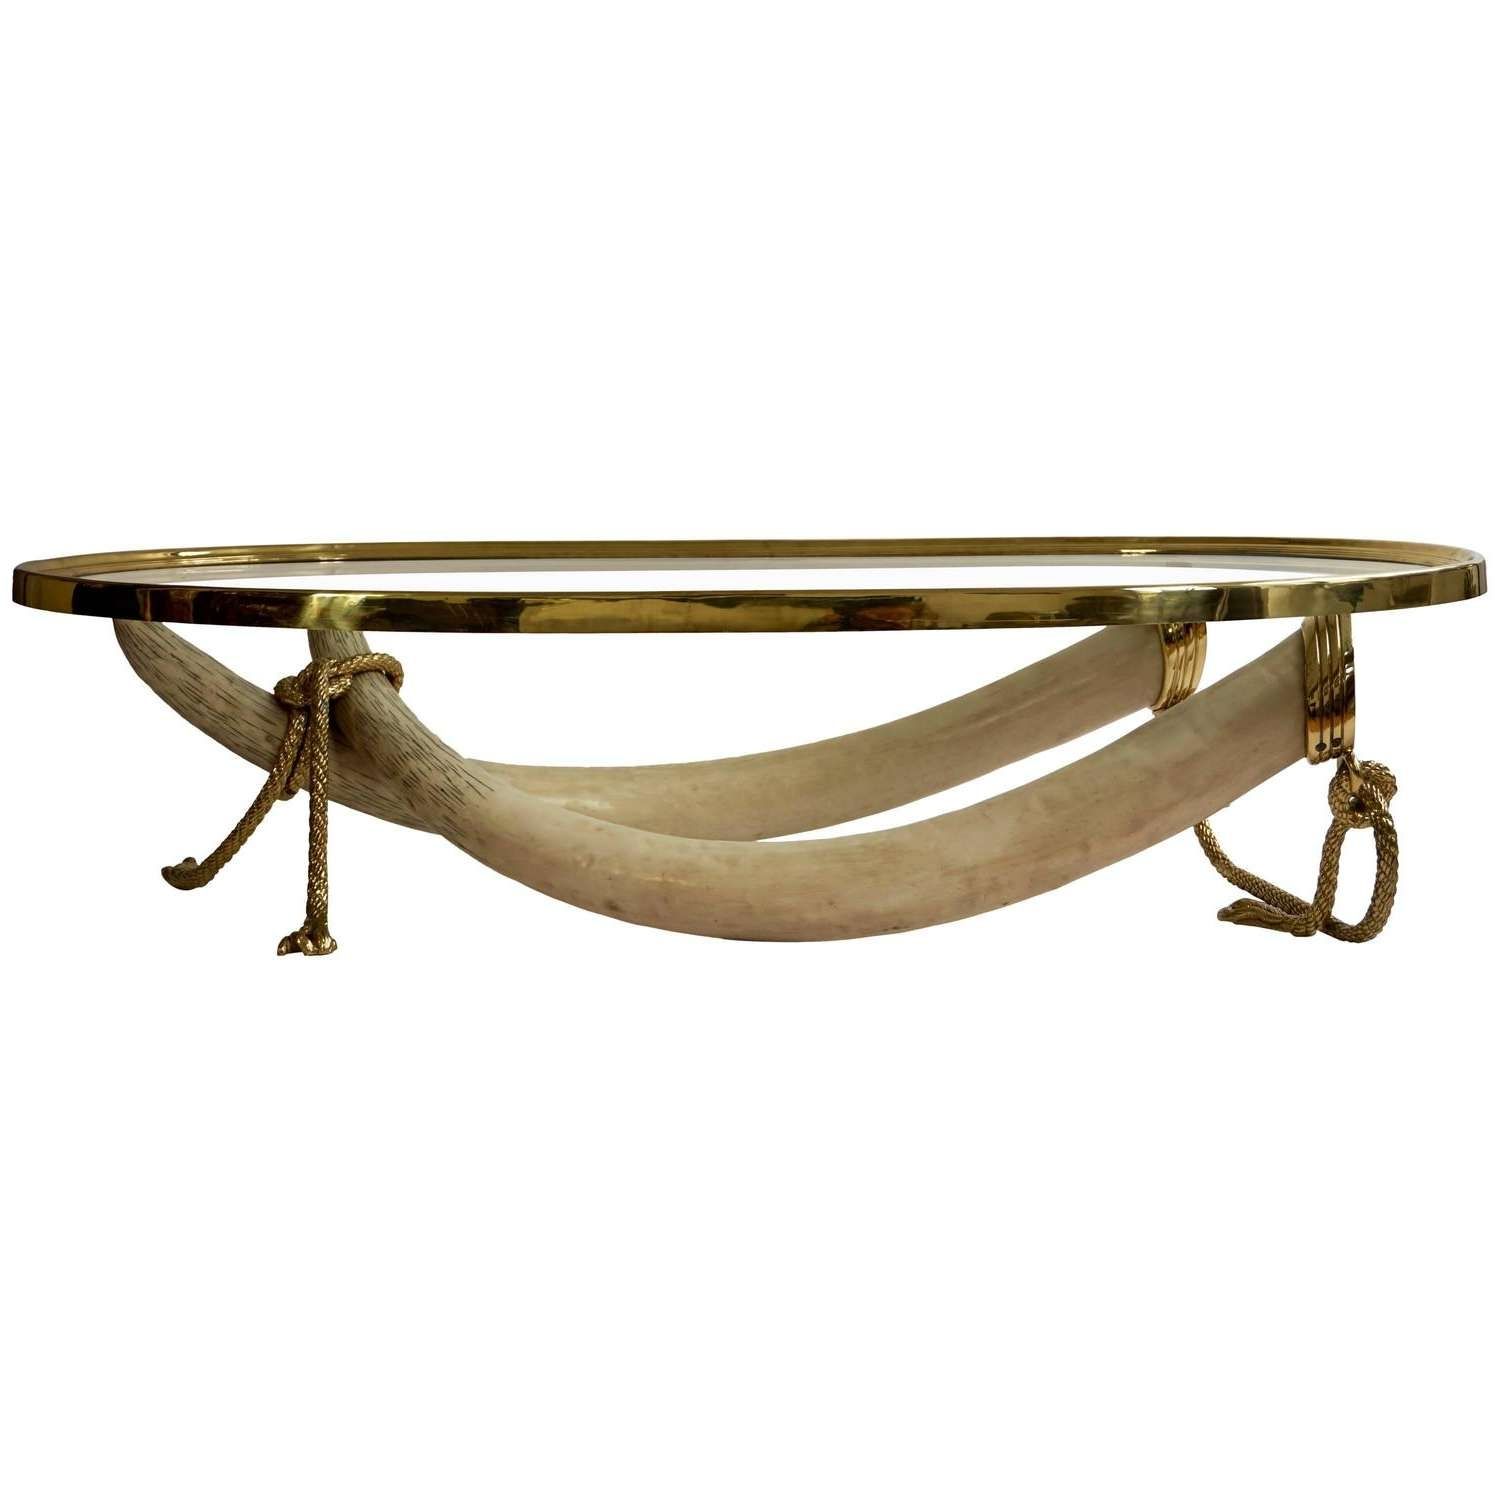 Most Current Elephant Coffee Tables With Glass Top Inside Large Glass And Brass Elephant Tusk Base Coffee Tablevalenti (View 16 of 20)